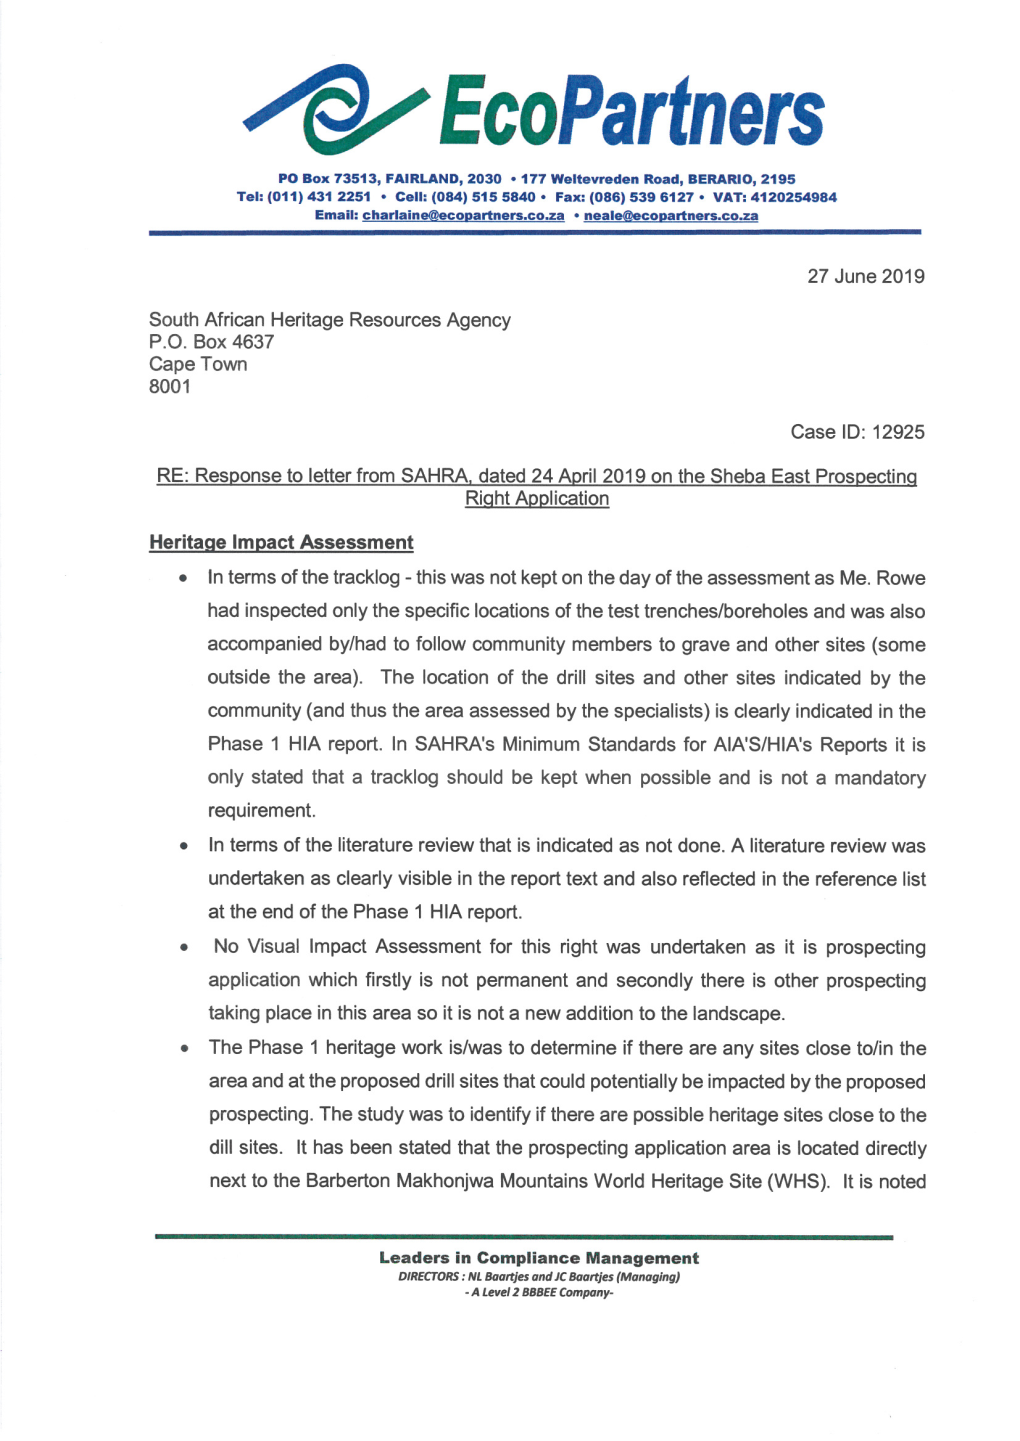 Response to Letter of 24 April 2019